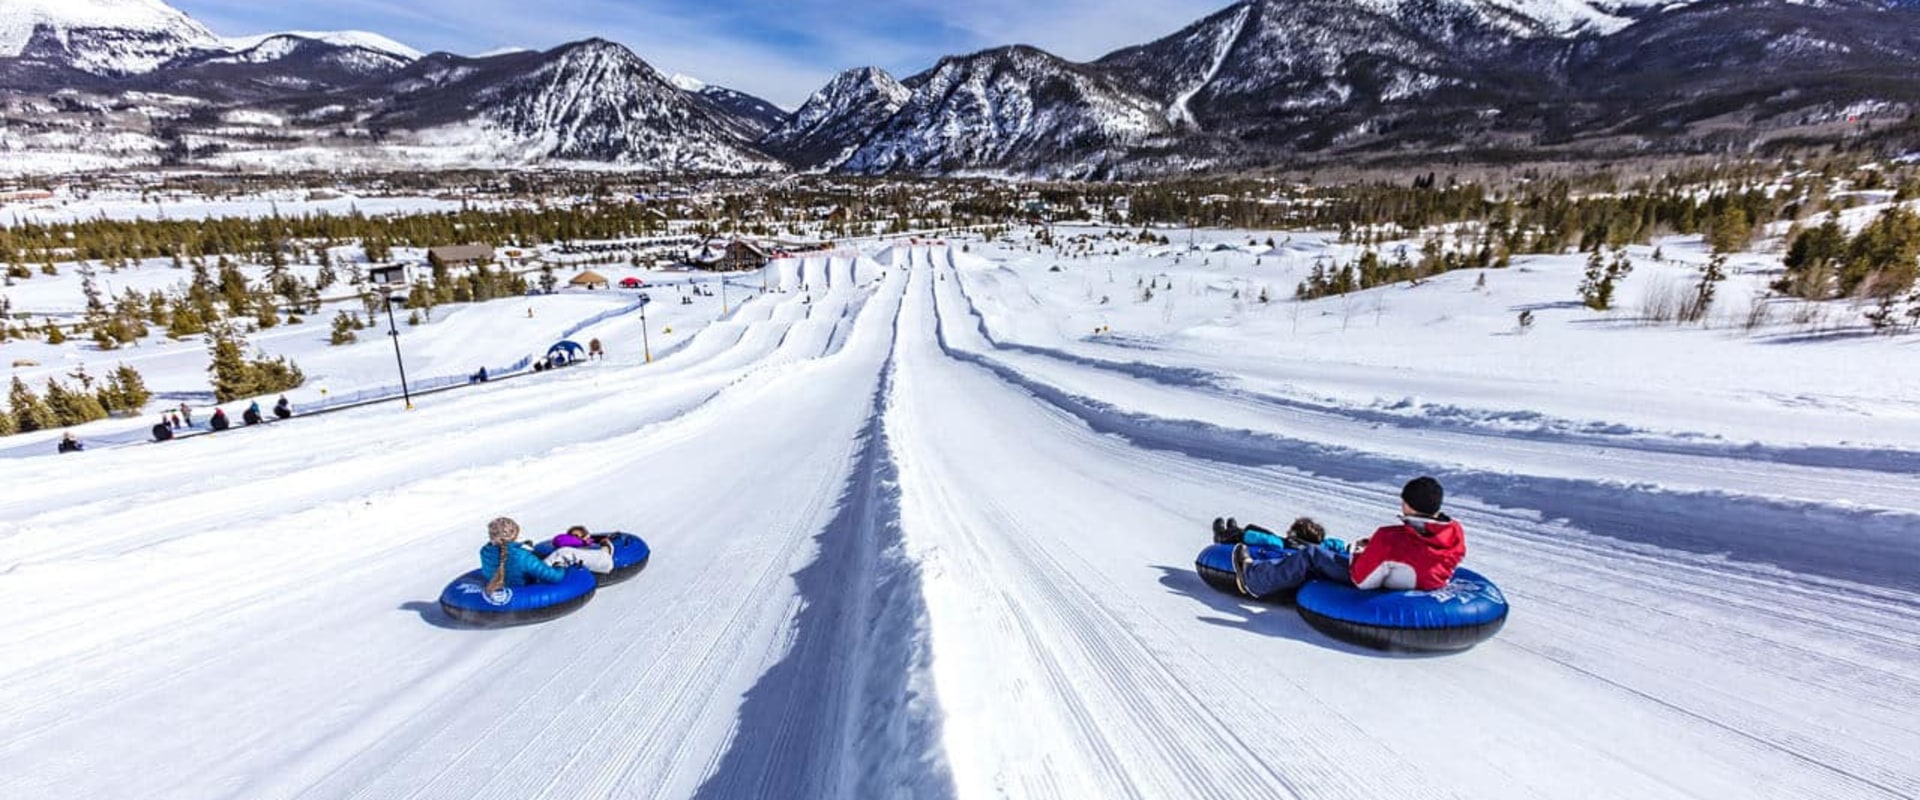 Snow Tubing in Colorado Springs: Where to Find the Best Adventure